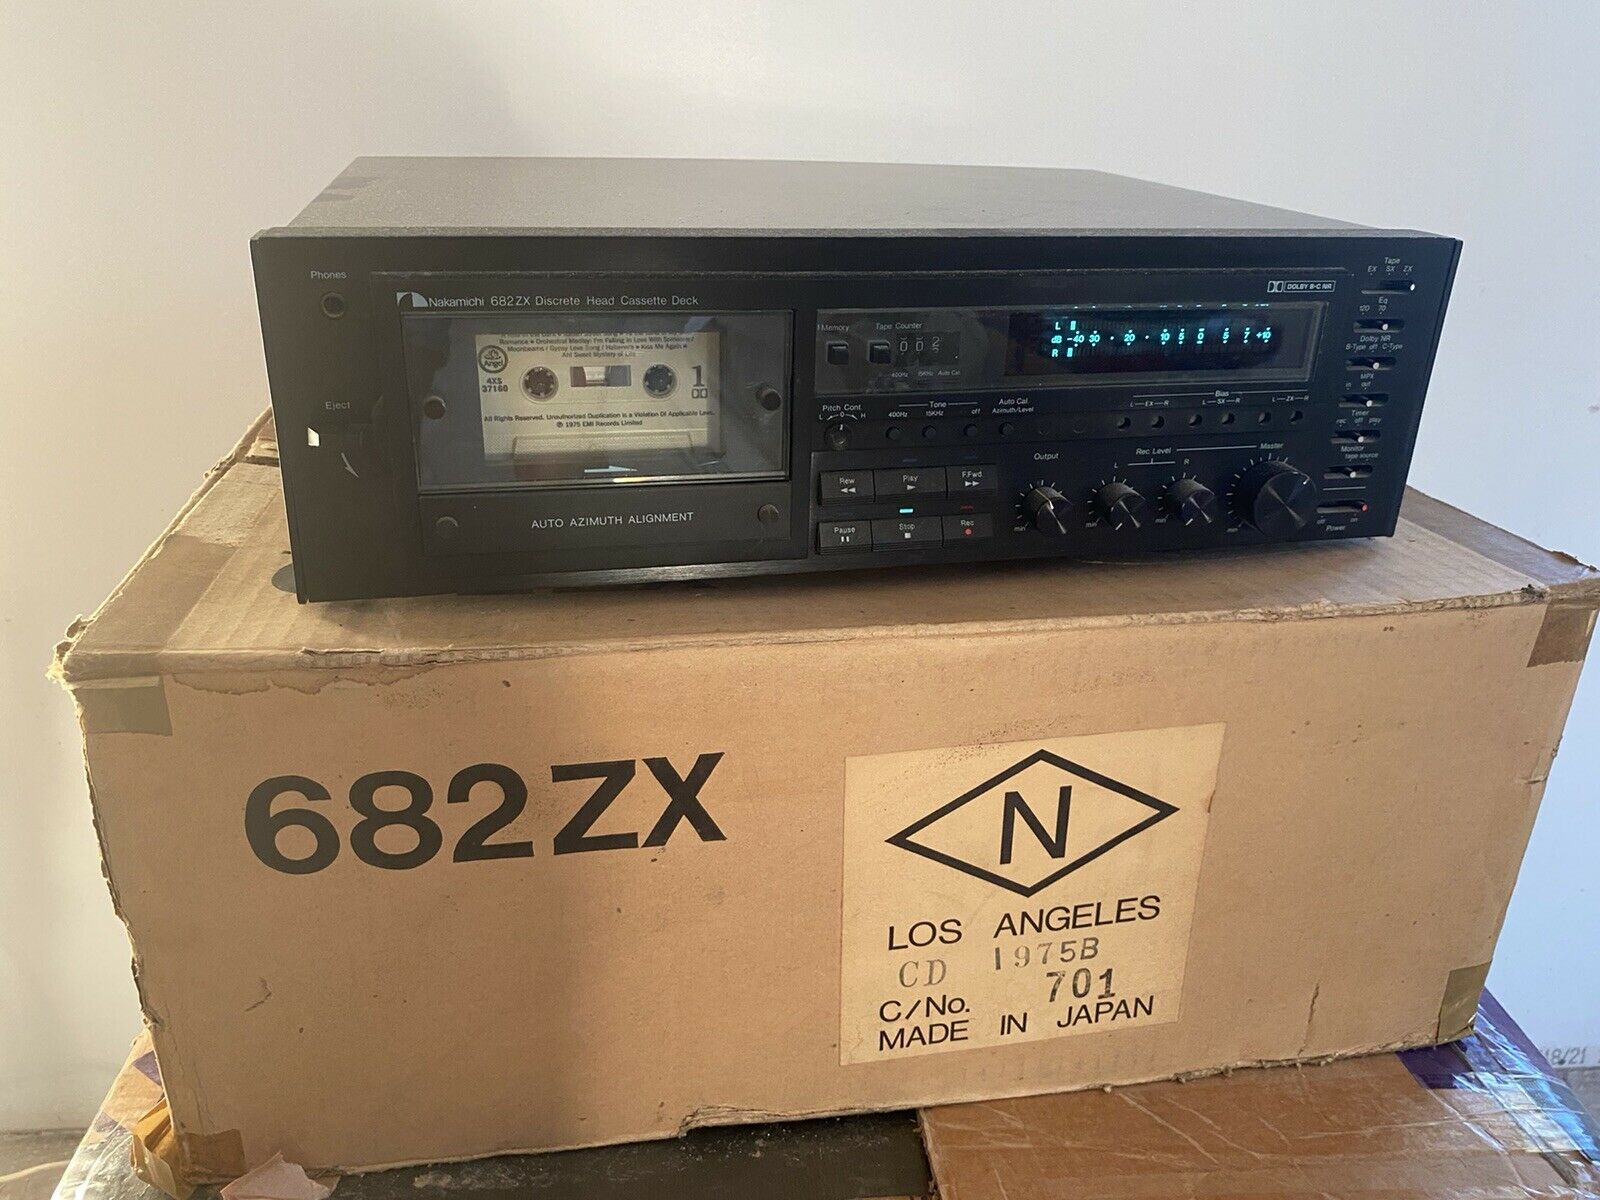 One And Only Limited Nakamichi 682zx Auto Azimuth Cassette Deck 120-240v